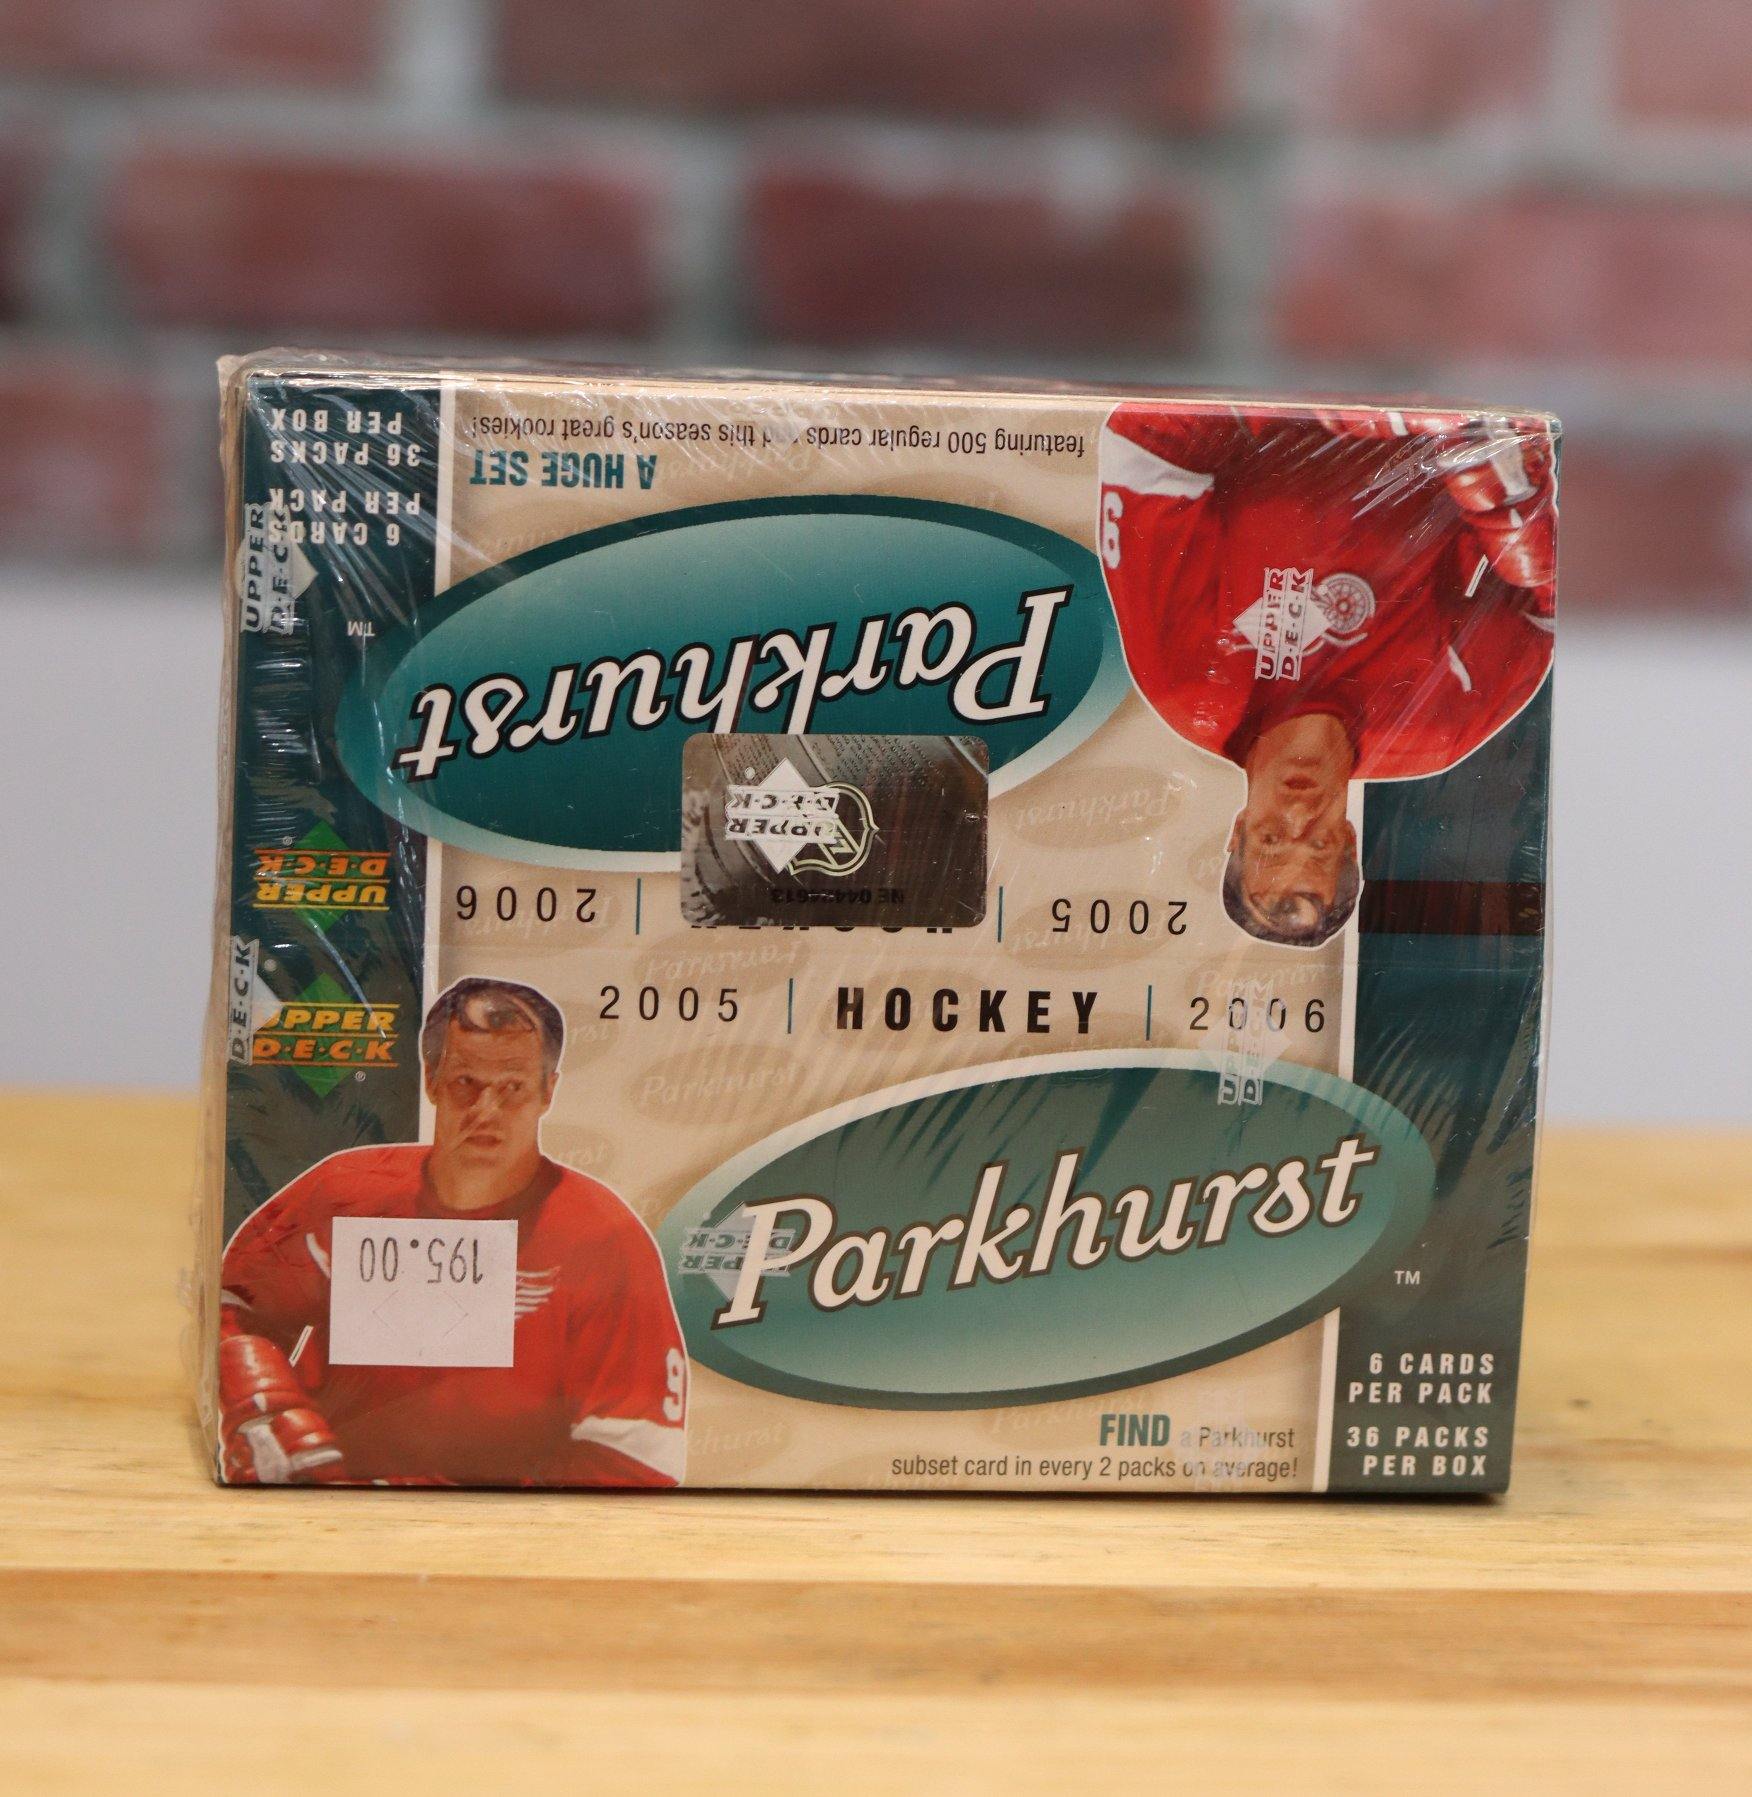 2005/06 Parkurst Hockey Card Wax Box (36 Packs) Factory Sealed - FLIP Collectibles Shop